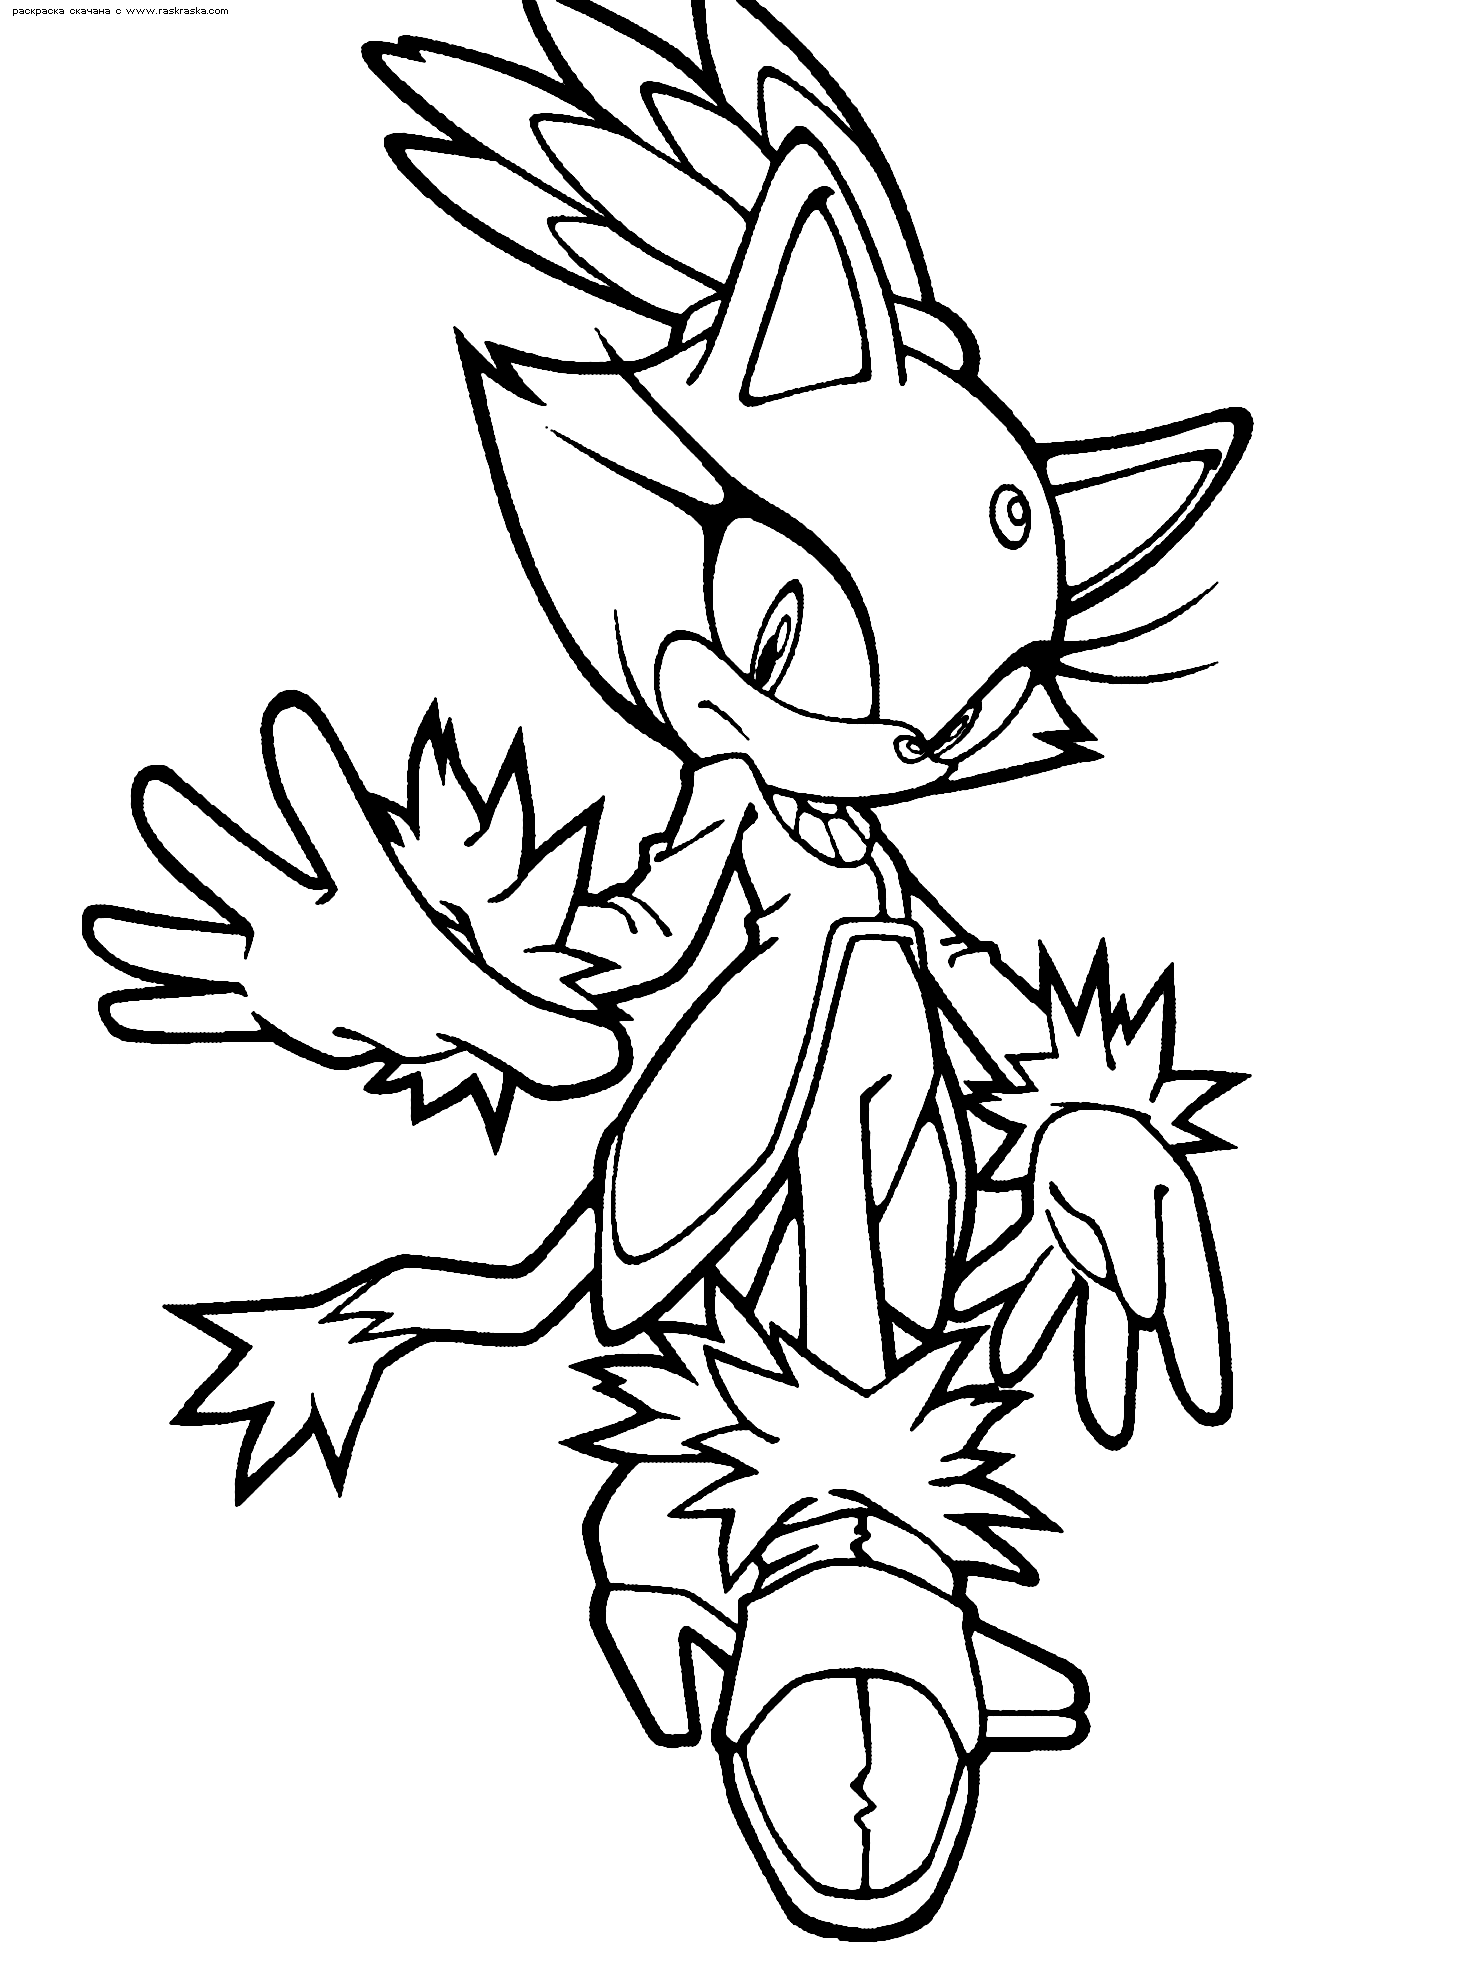 Sonic Colouring Sheets 2